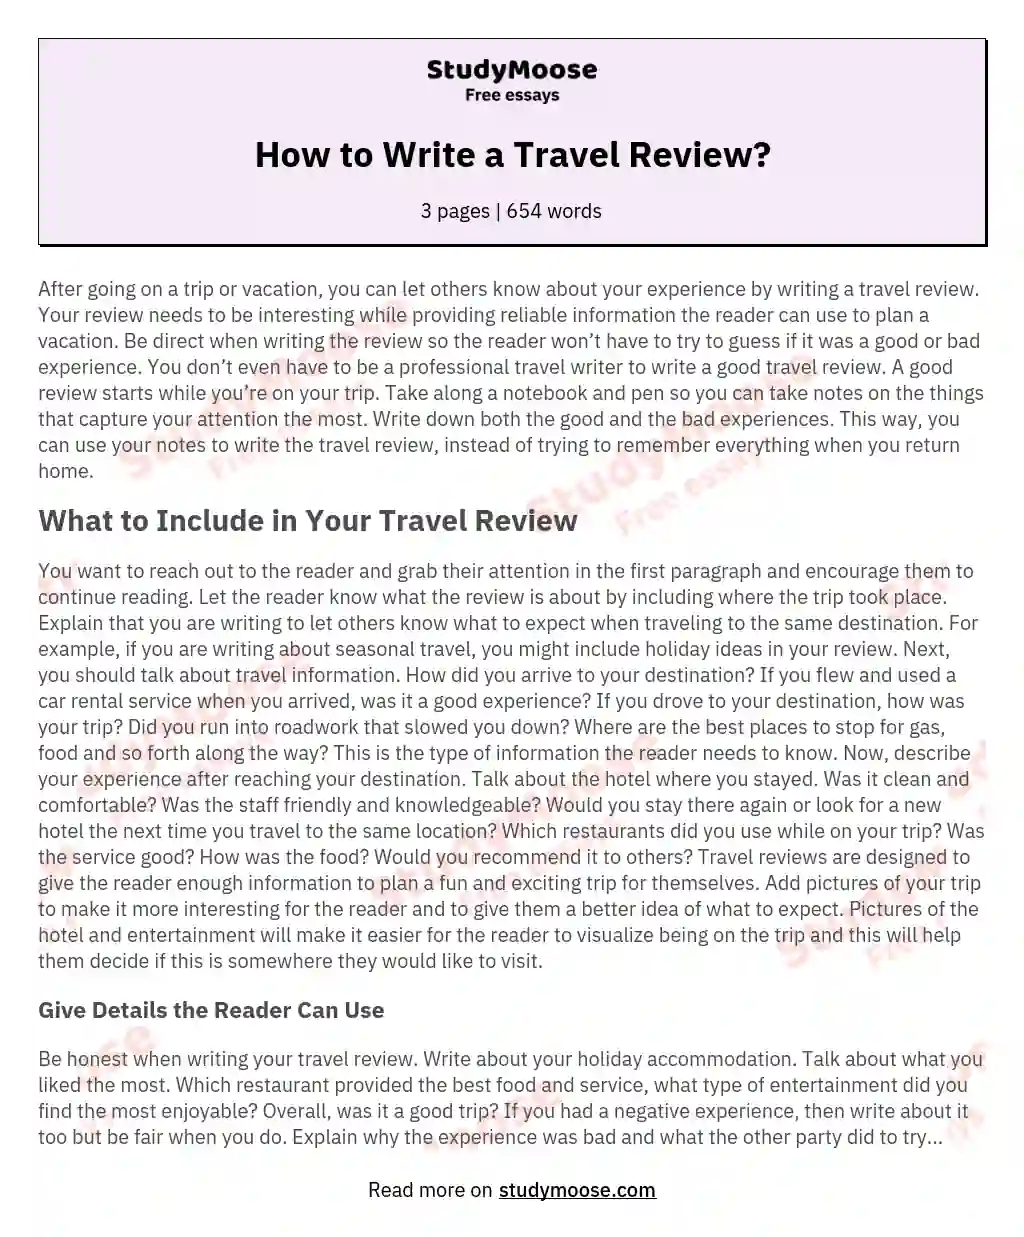 How to Write a Travel Review?